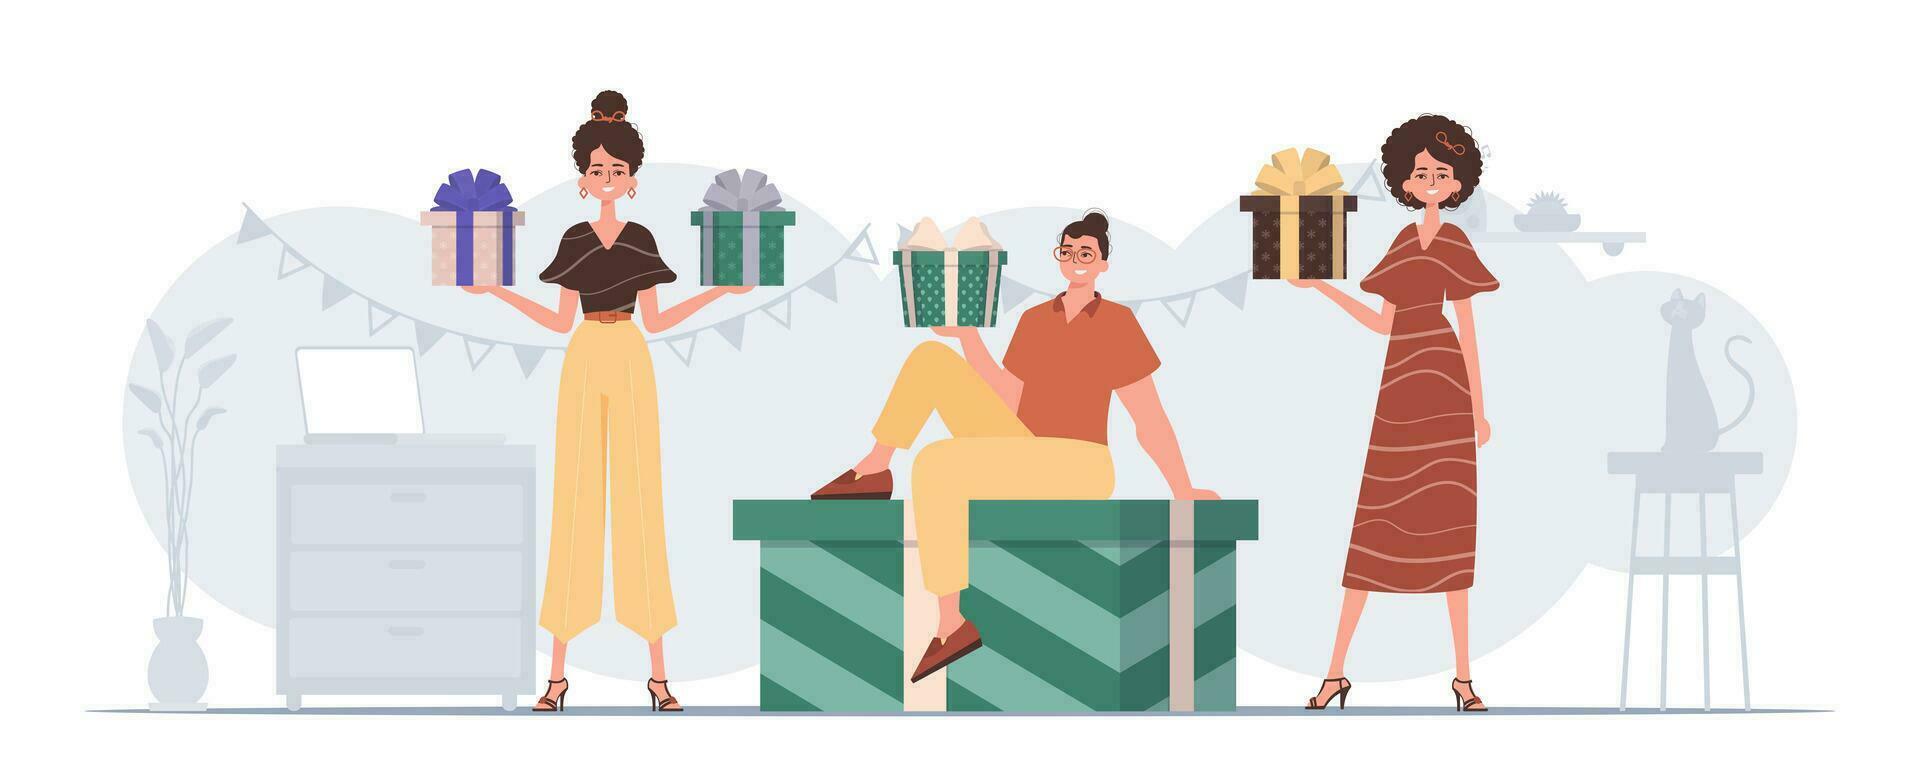 A group of people holds a festive gift box in their hands. Modern flat vector illustration.